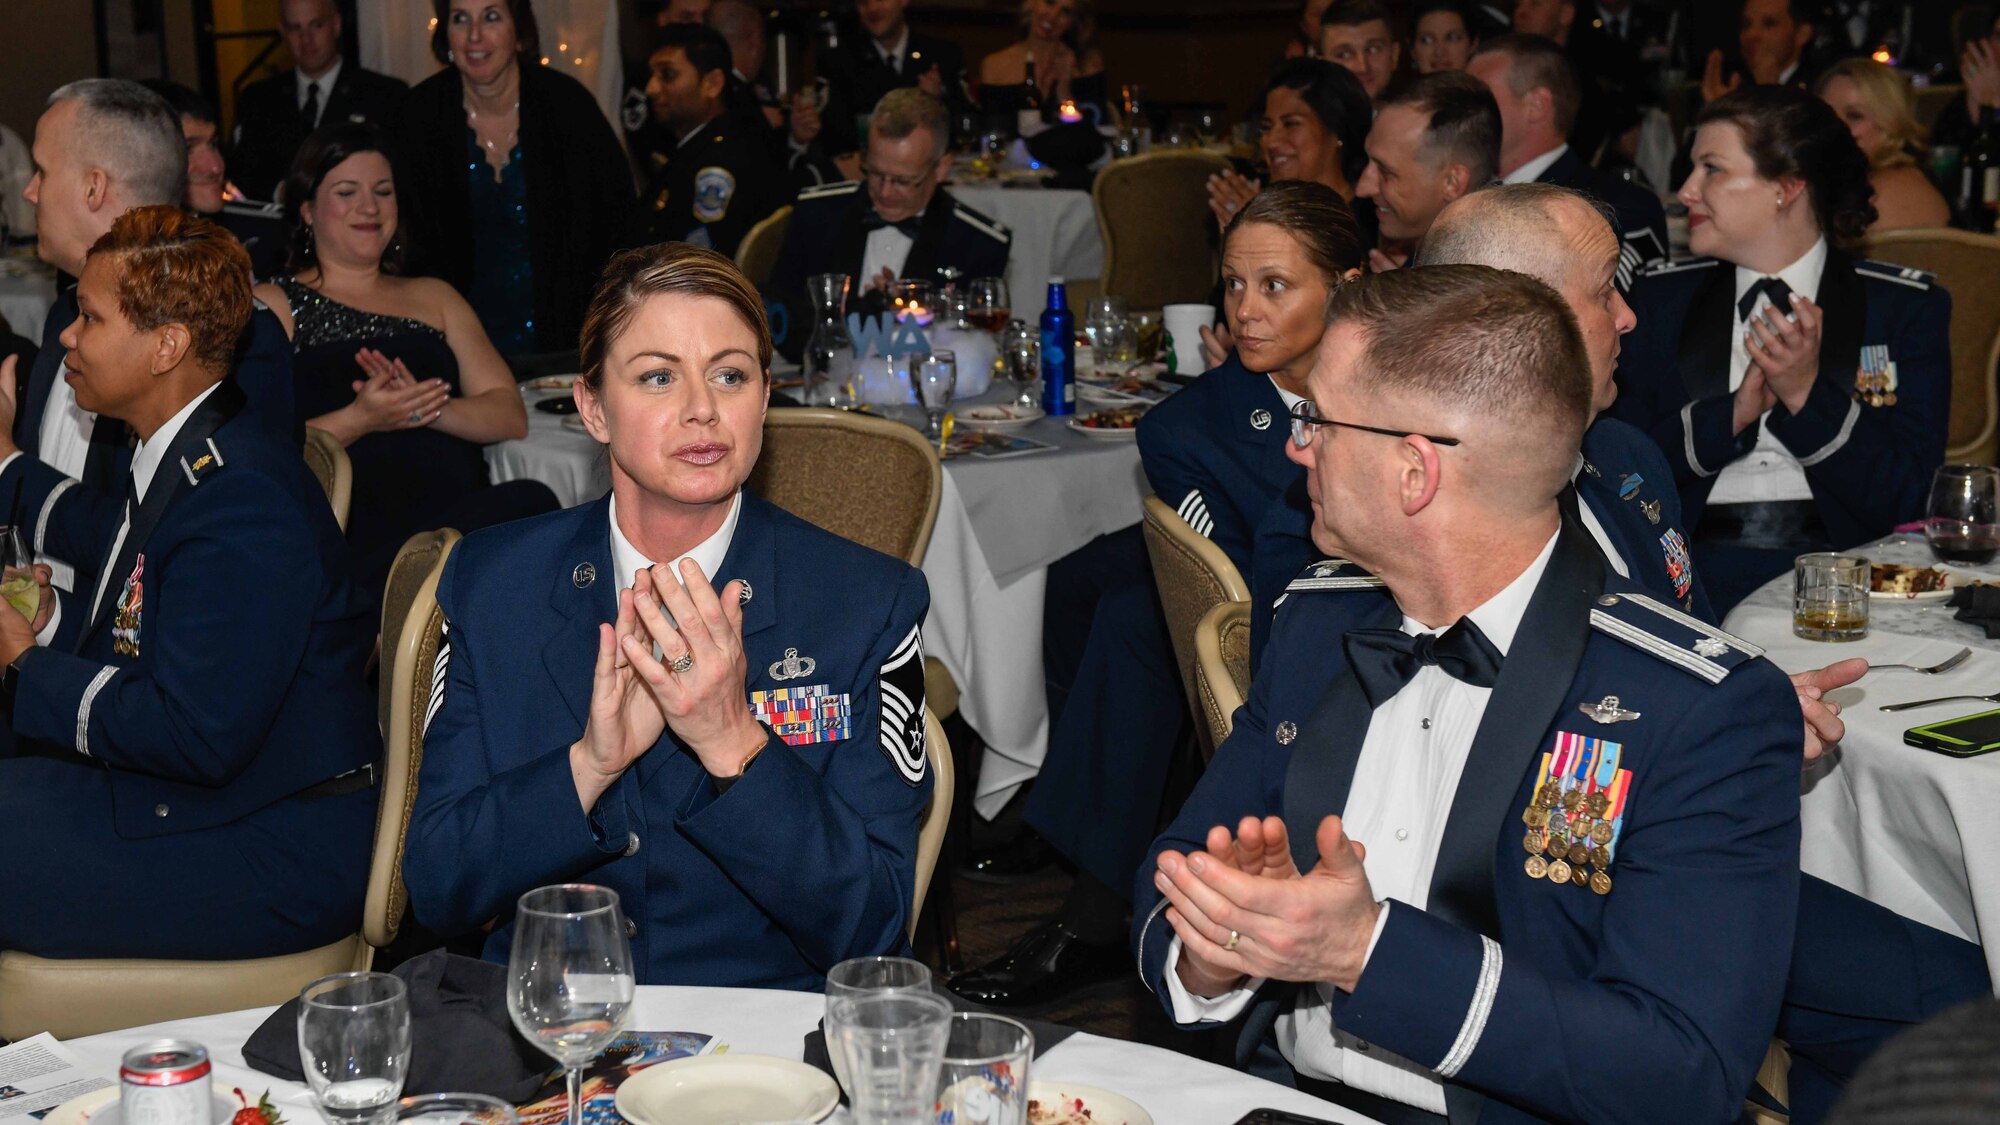 The Airman of the Year award program is designed to recognize Airmen who display superior leadership, job performance and personal achievement.